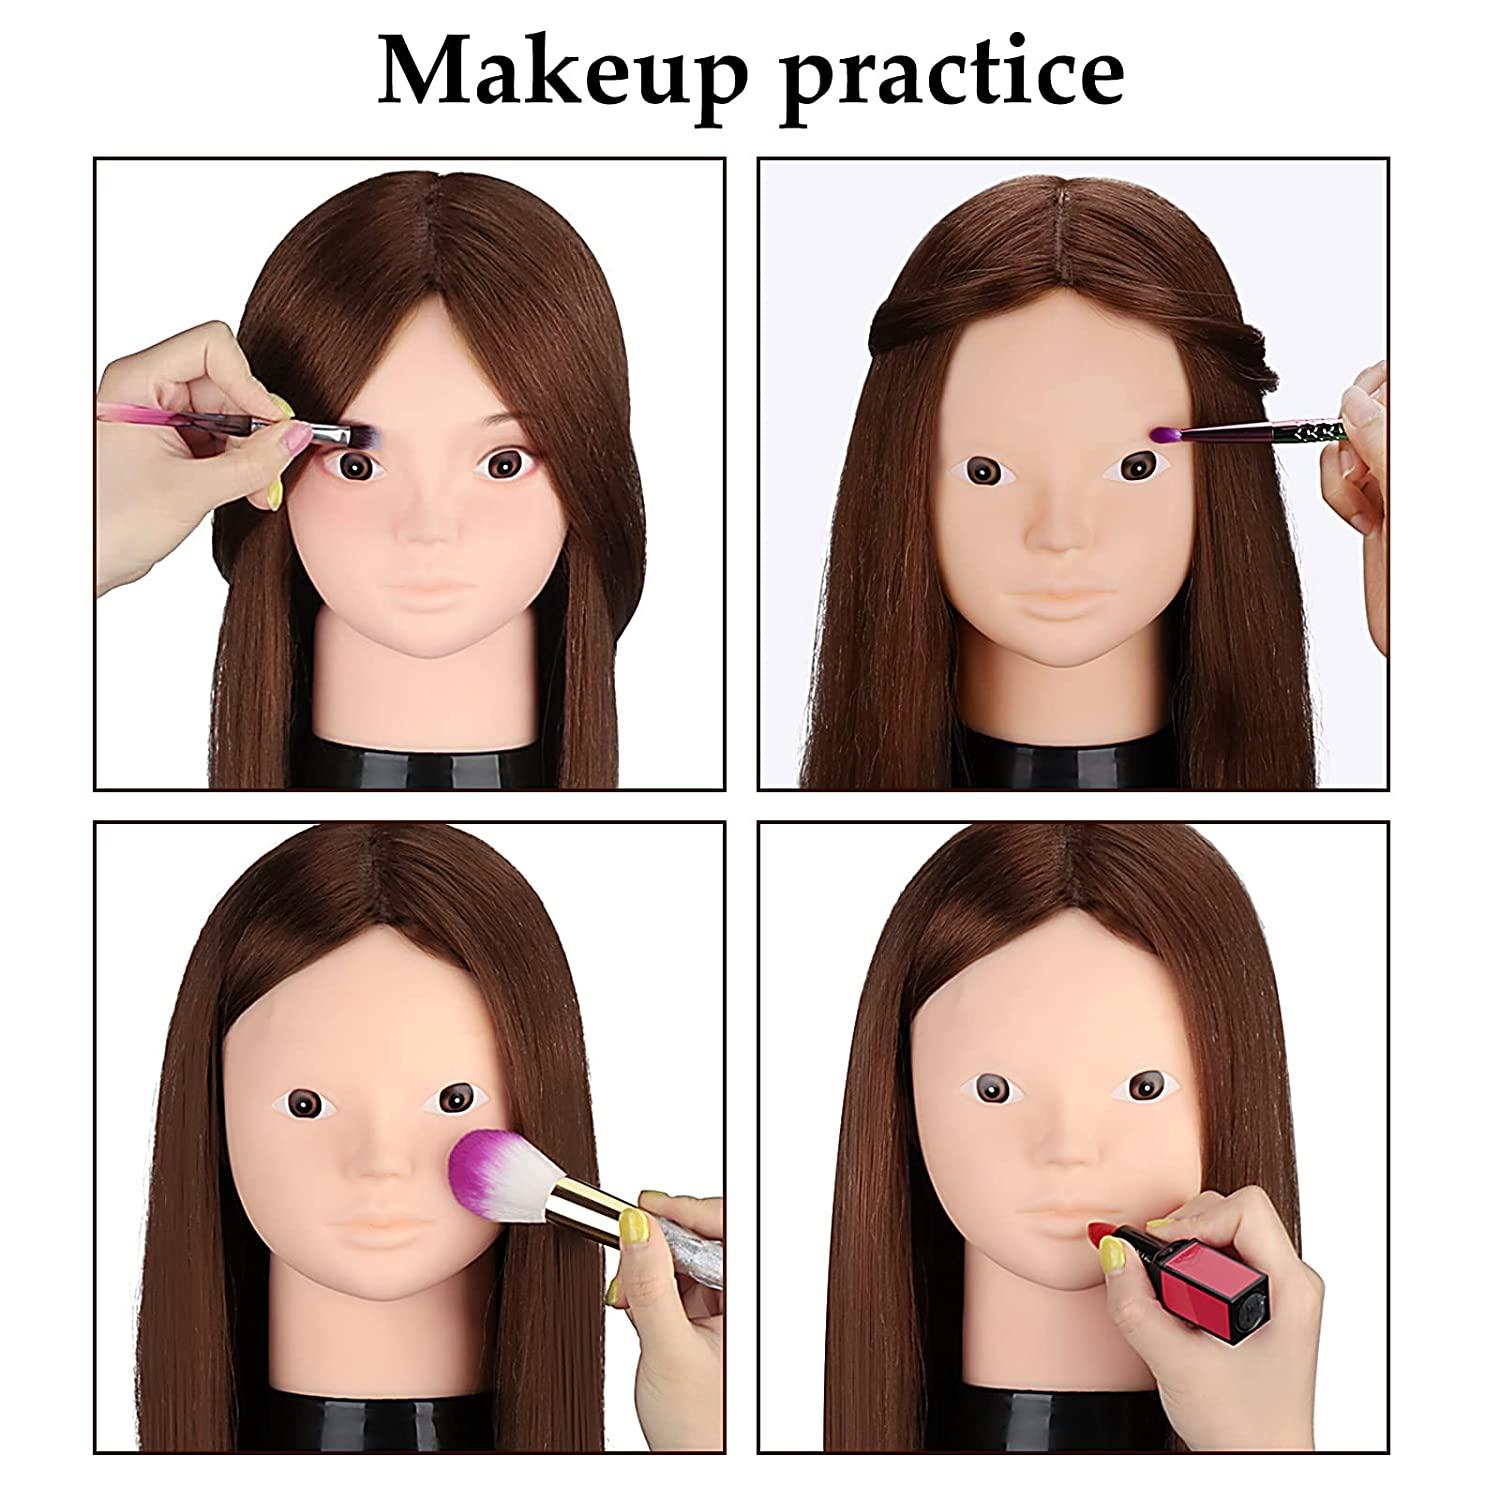 Makeup & Hairstyling Doll